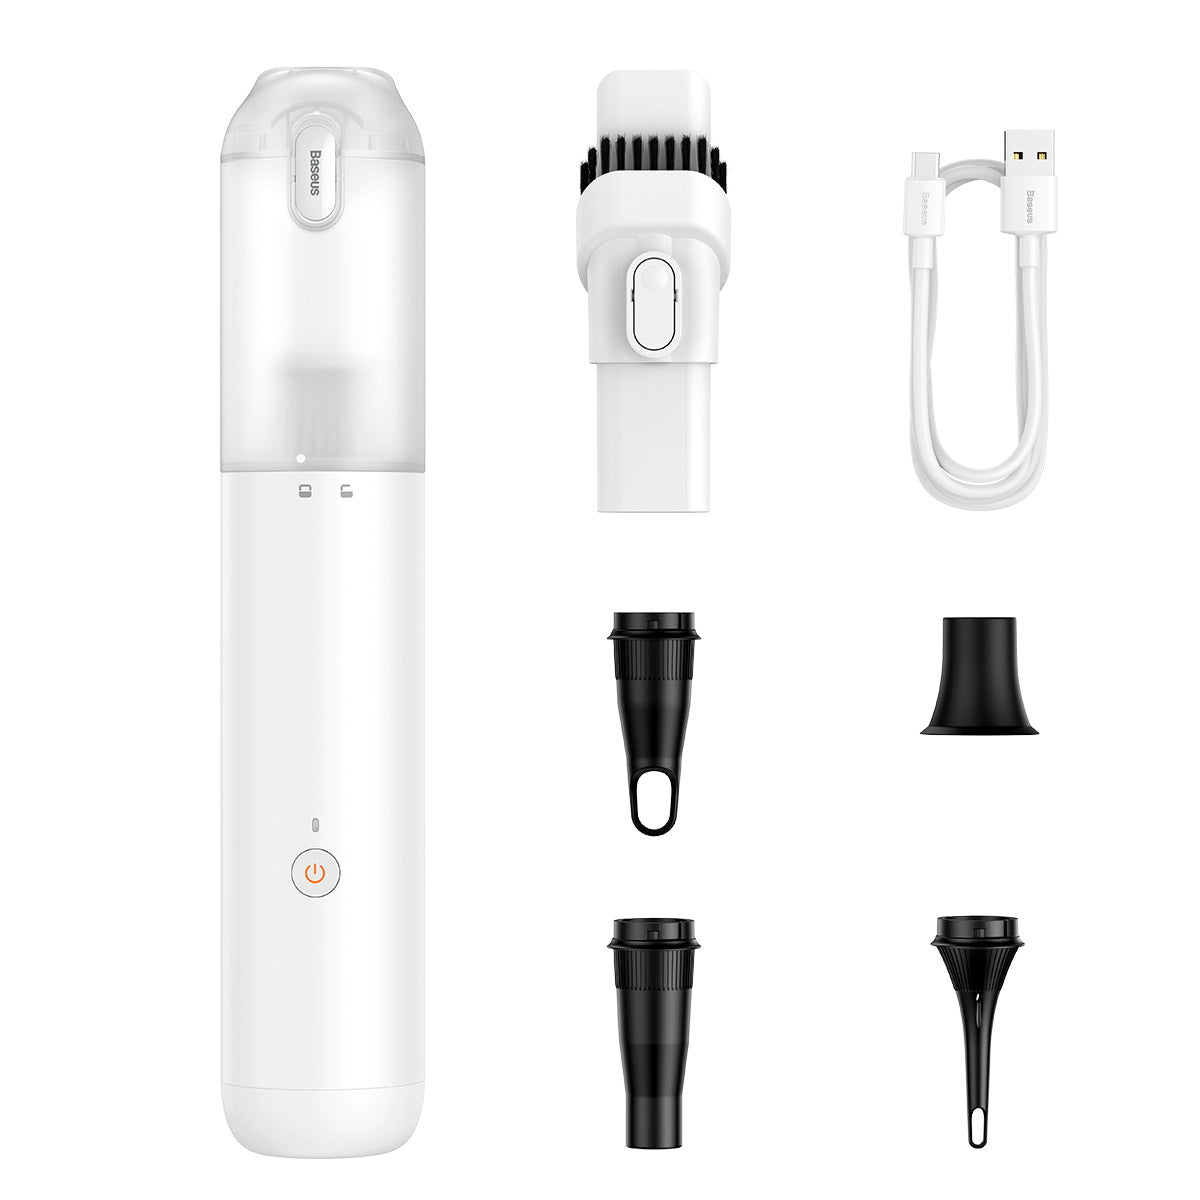 Baseus A3lite Car Vacuum Cleaner White Package Content